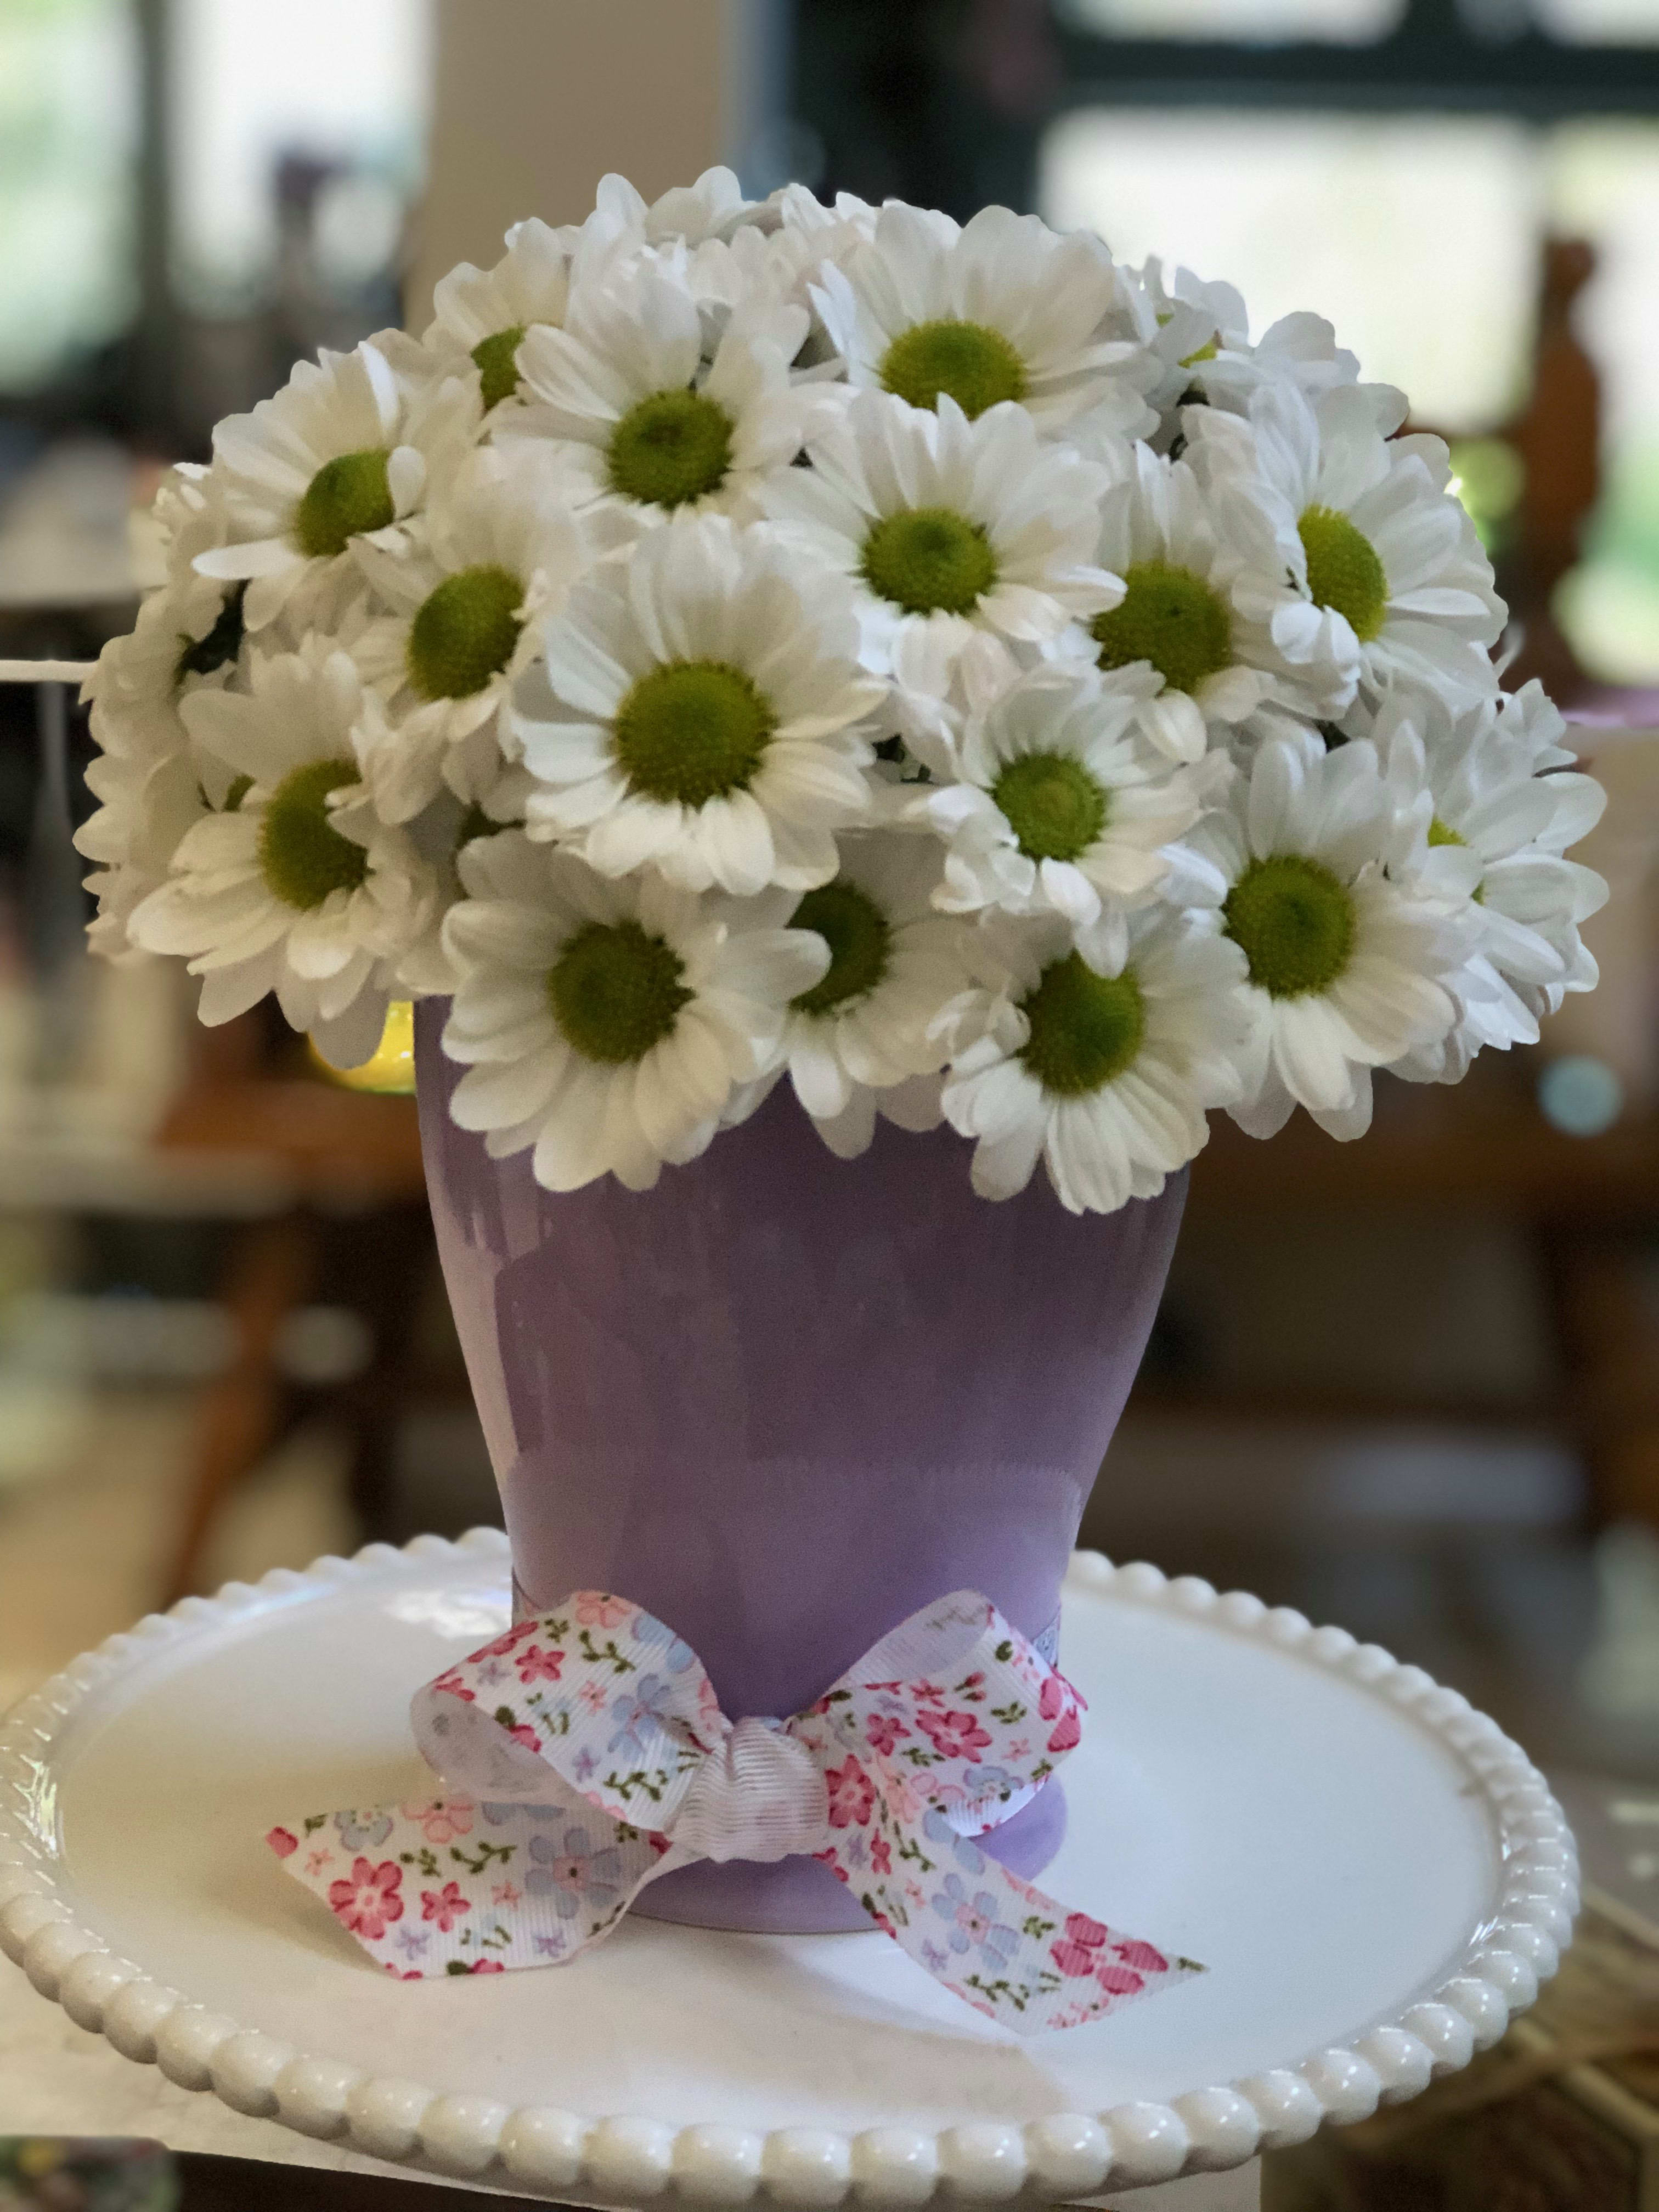 Everything’s Coming Up Daisies - One of our favorites-- all daisies! A great pick to bring someone lots of cheer.